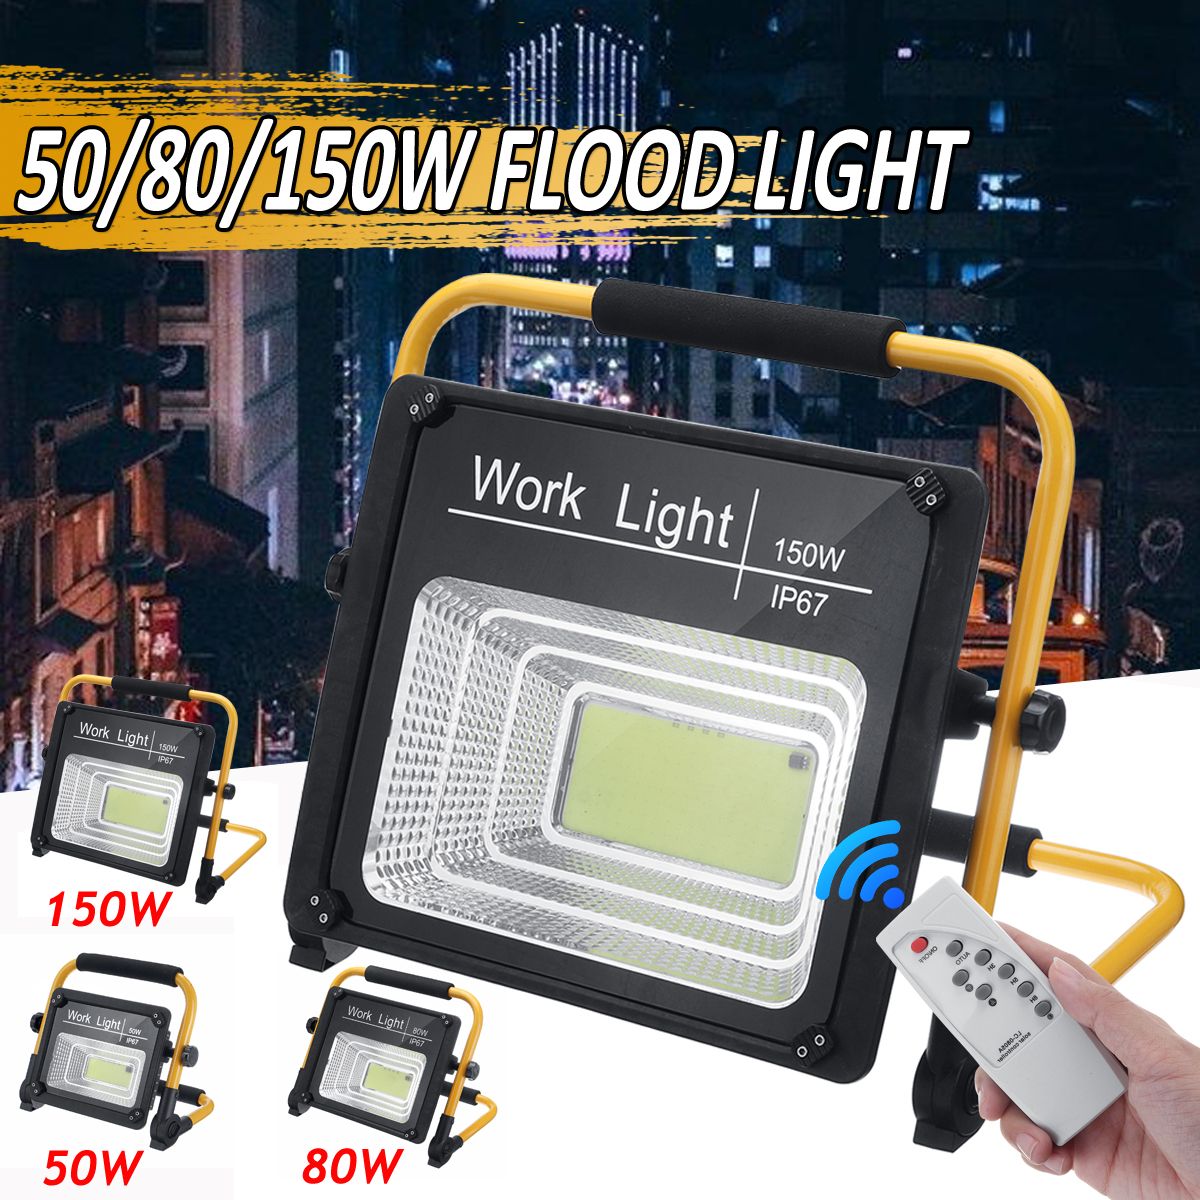 5080150W-LED-Outside-Wall-Light-Garden-Security-Flood-Light-IP67--Remote-Control-1650789